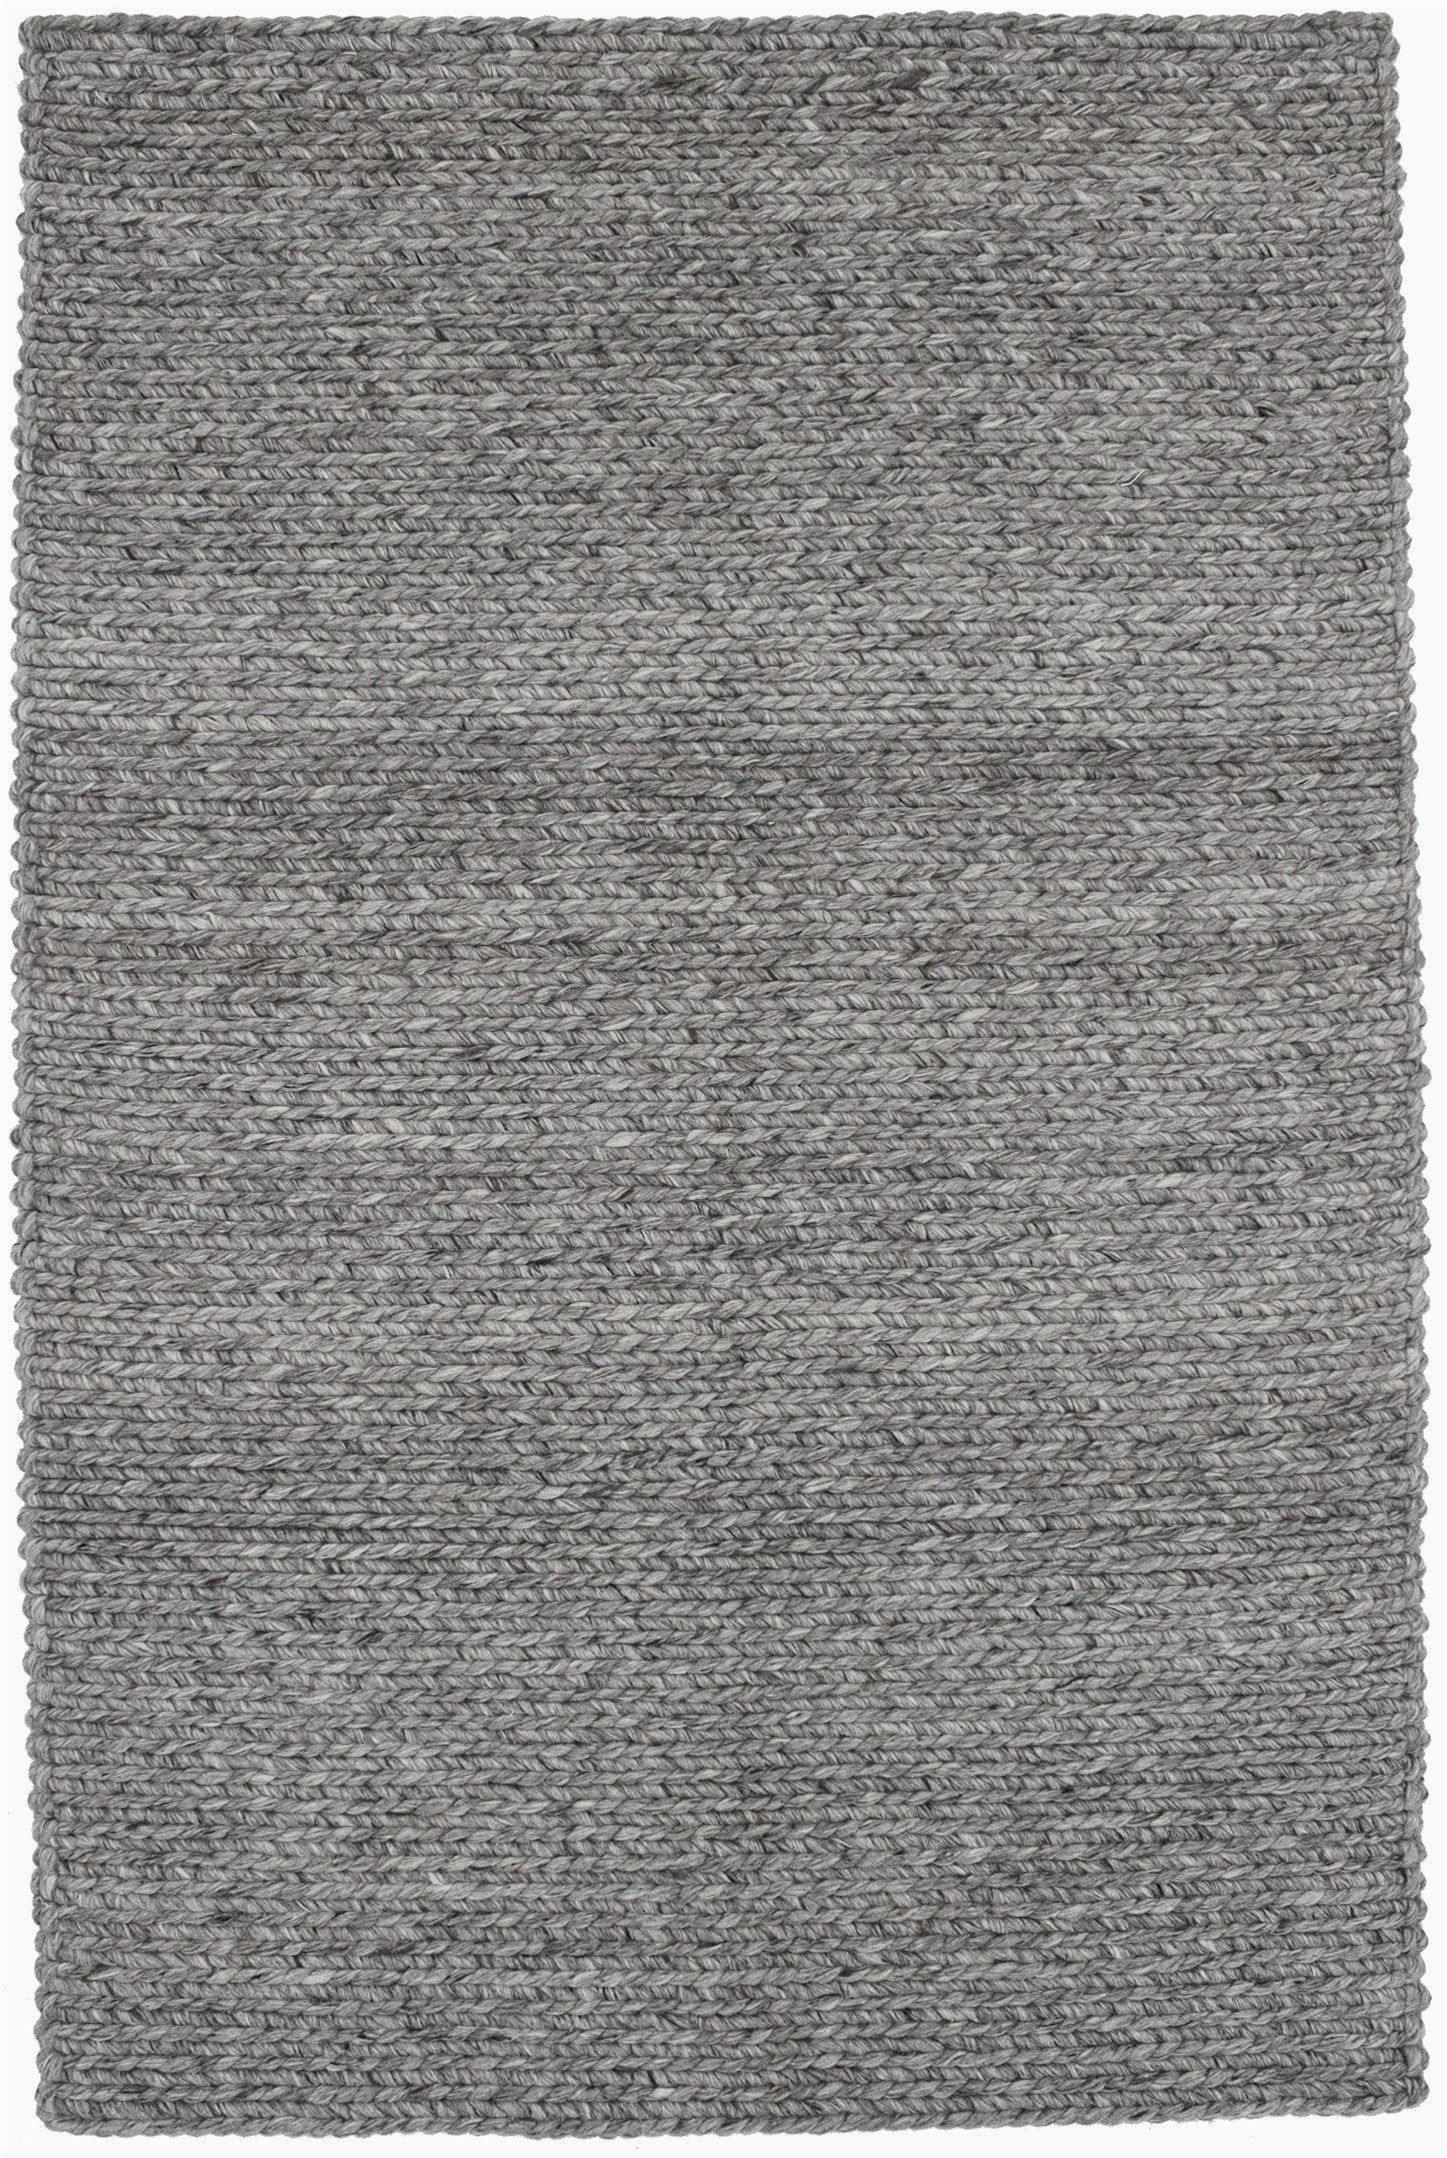 Solid Grey area Rug 5×7 Details About solid Grey Modern 4 5×6 9 Hand Knotted oriental area Rug Kitchen Bathroom Carpet